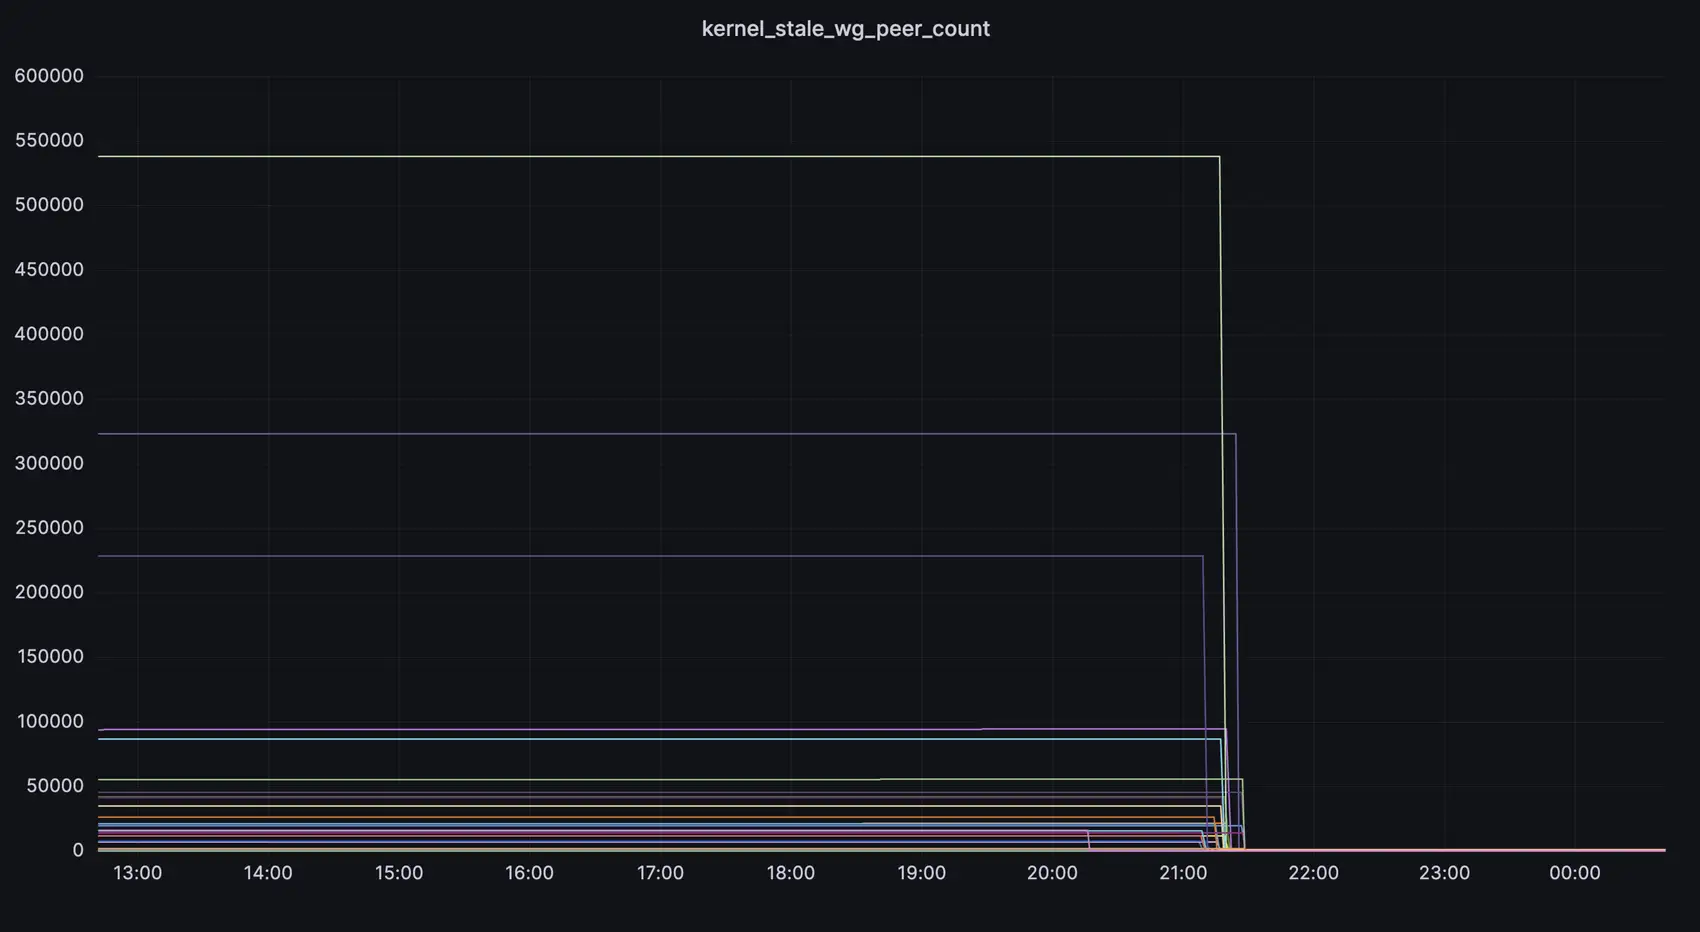 a Grafana chart of 'kernel_stale_wg_peer_count' vs. time. For the first few hours, all traces are flat. Most are at values between 0 and 50,000 and the top-most is just under 550,000. Towards the end of the graph, each line in turn jumps sharply down to the bottom, and at the end of the chart all datapoints are indistinguishable from 0.